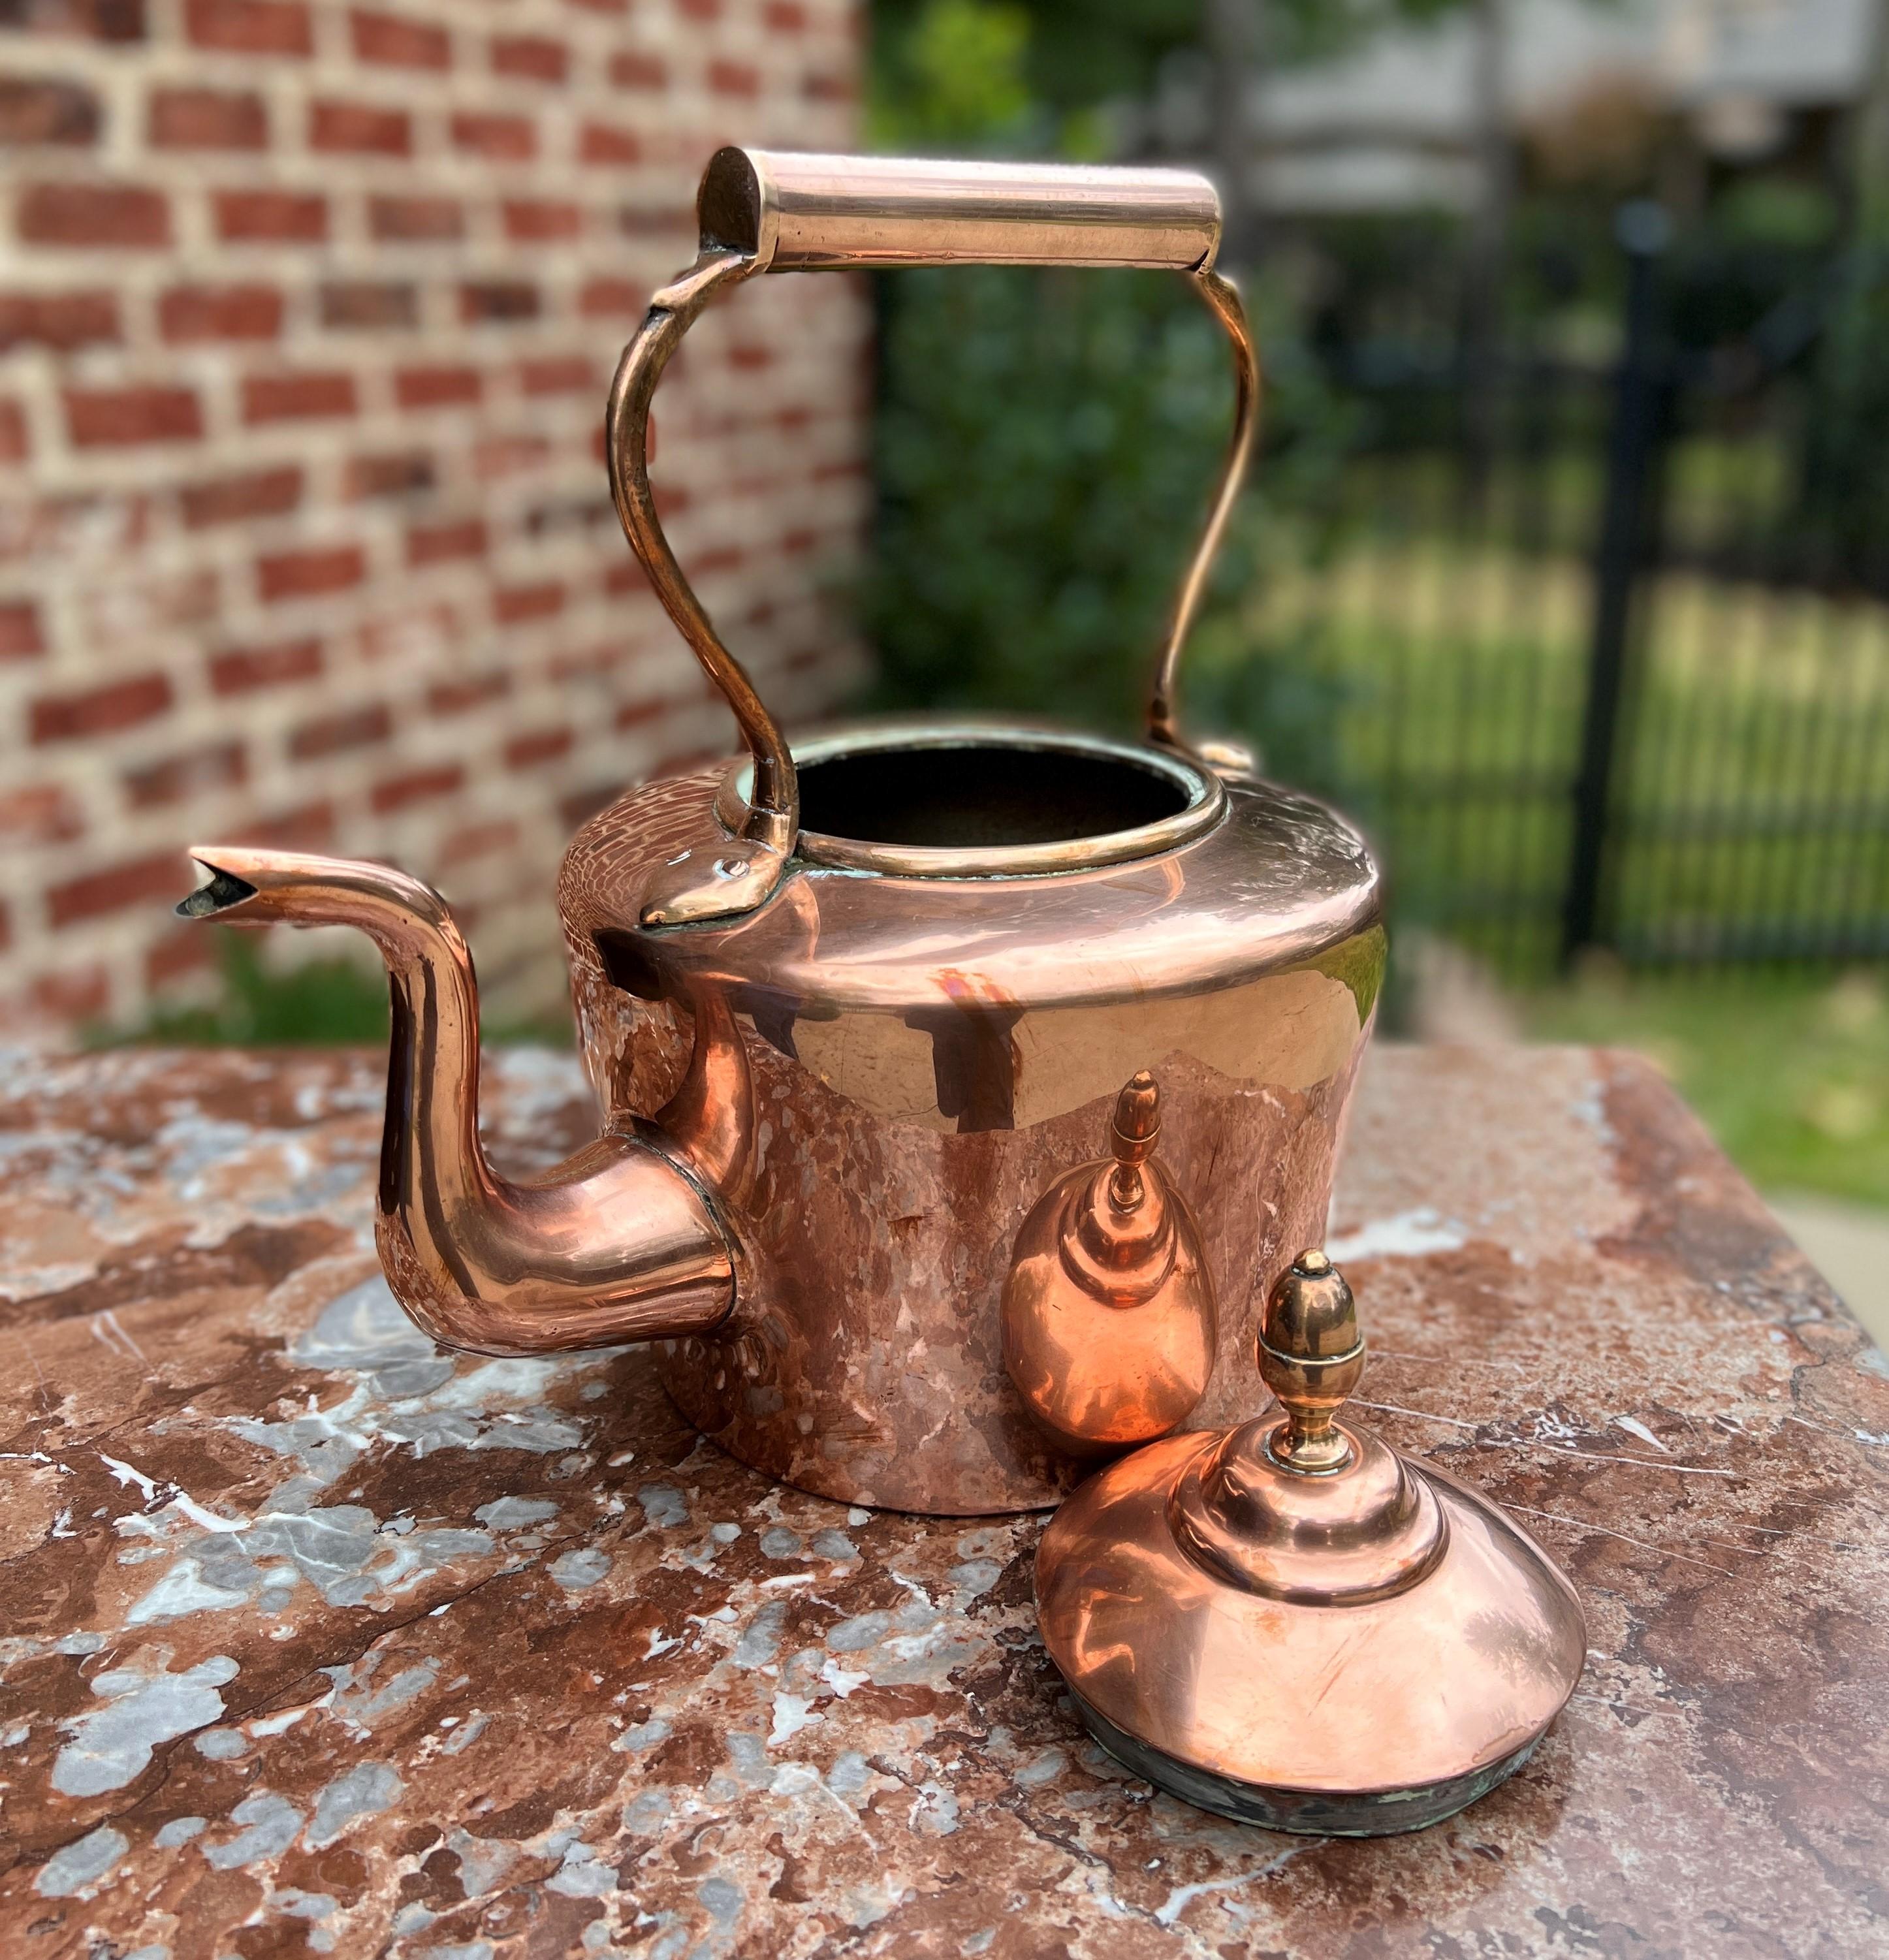 Antique English Copper Brass Tea Kettle Coffee Pitcher Spout Handle #1 c. 1900 In Good Condition For Sale In Tyler, TX